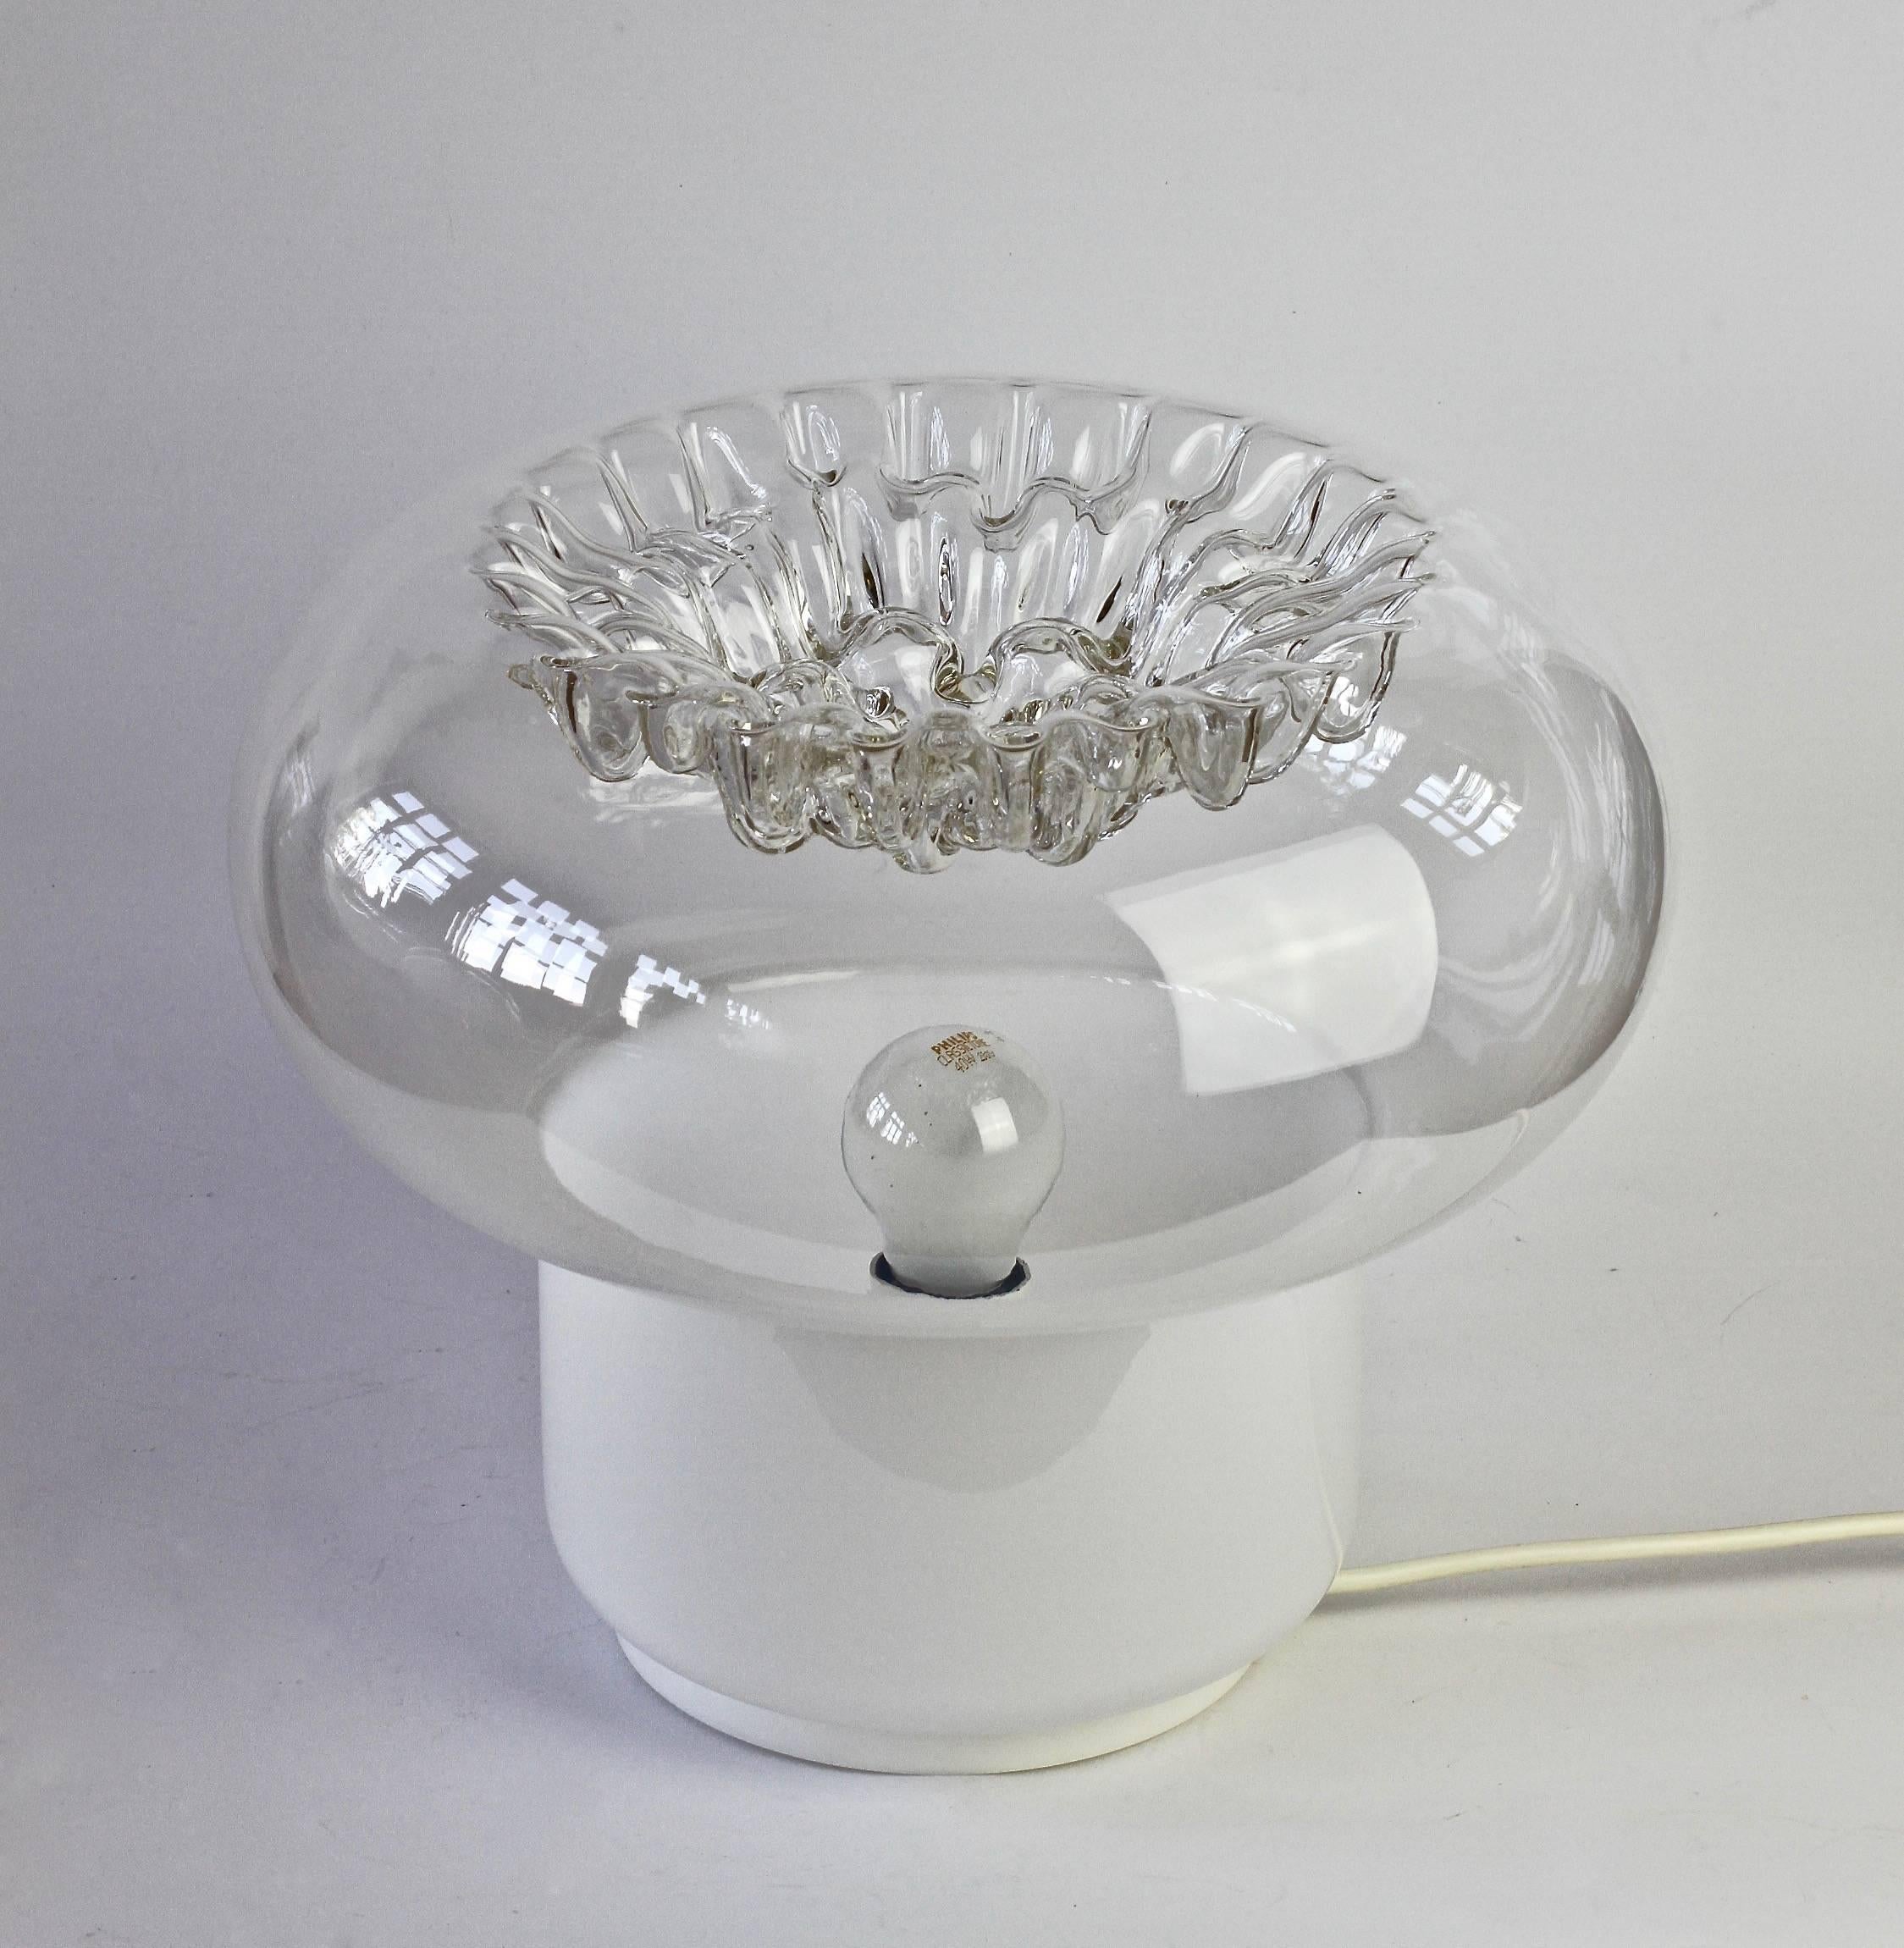 Mid-Century vintage textured glass table lamp attributed to Toni Zuccheri for VeArt circa 1970s . A fantastic design featuring wonderfully textured clear and white toned 'milk' glass. Featuring a futuristic and striking textured glass shade, which